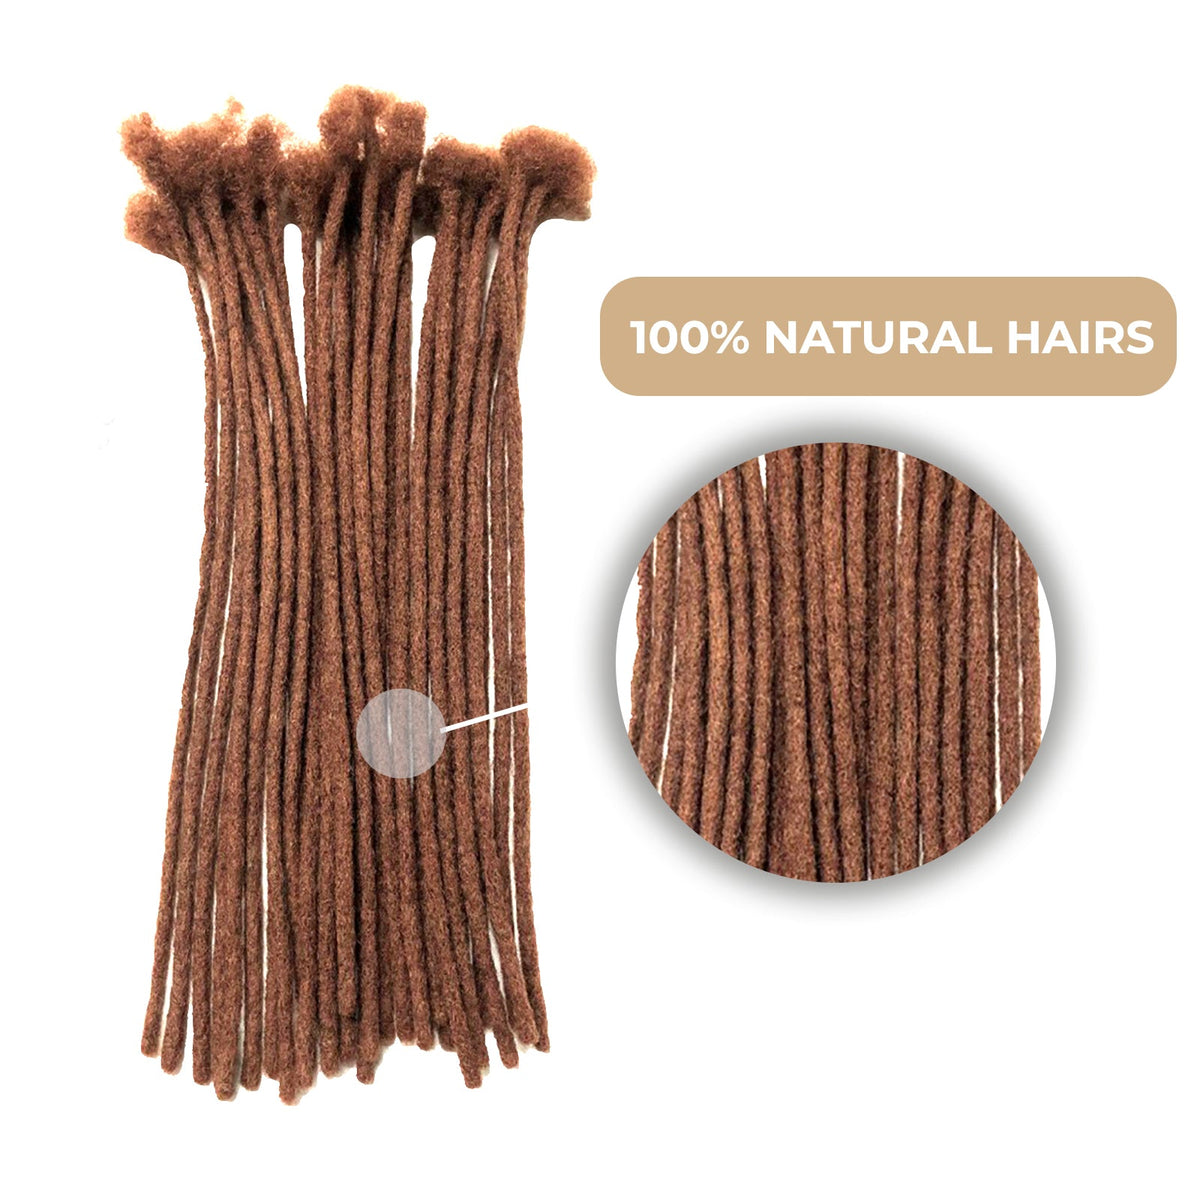 100% Human Hair Dreadlock Extensions 8 Inch 10 Strands Handmade Natural Loc Extensions Human Hair Bundle Dreads Extensions For Woman & Men Can Be Dyed/Bleached (Brown / 33, 8 inch length 0.6 cm Width